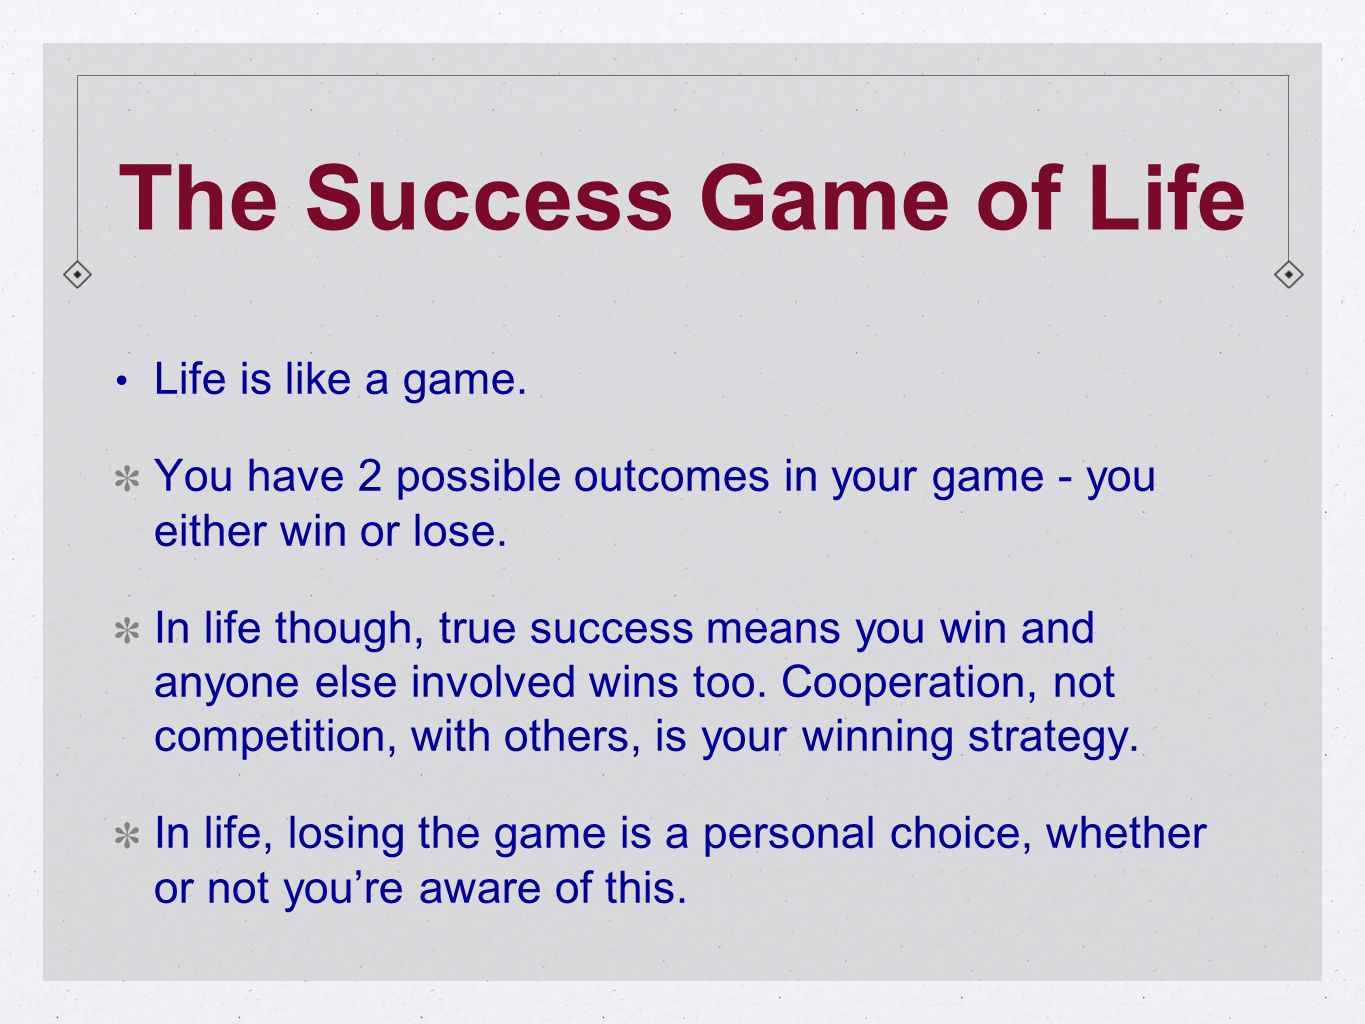 How to Succeed and Win at the Game of Life